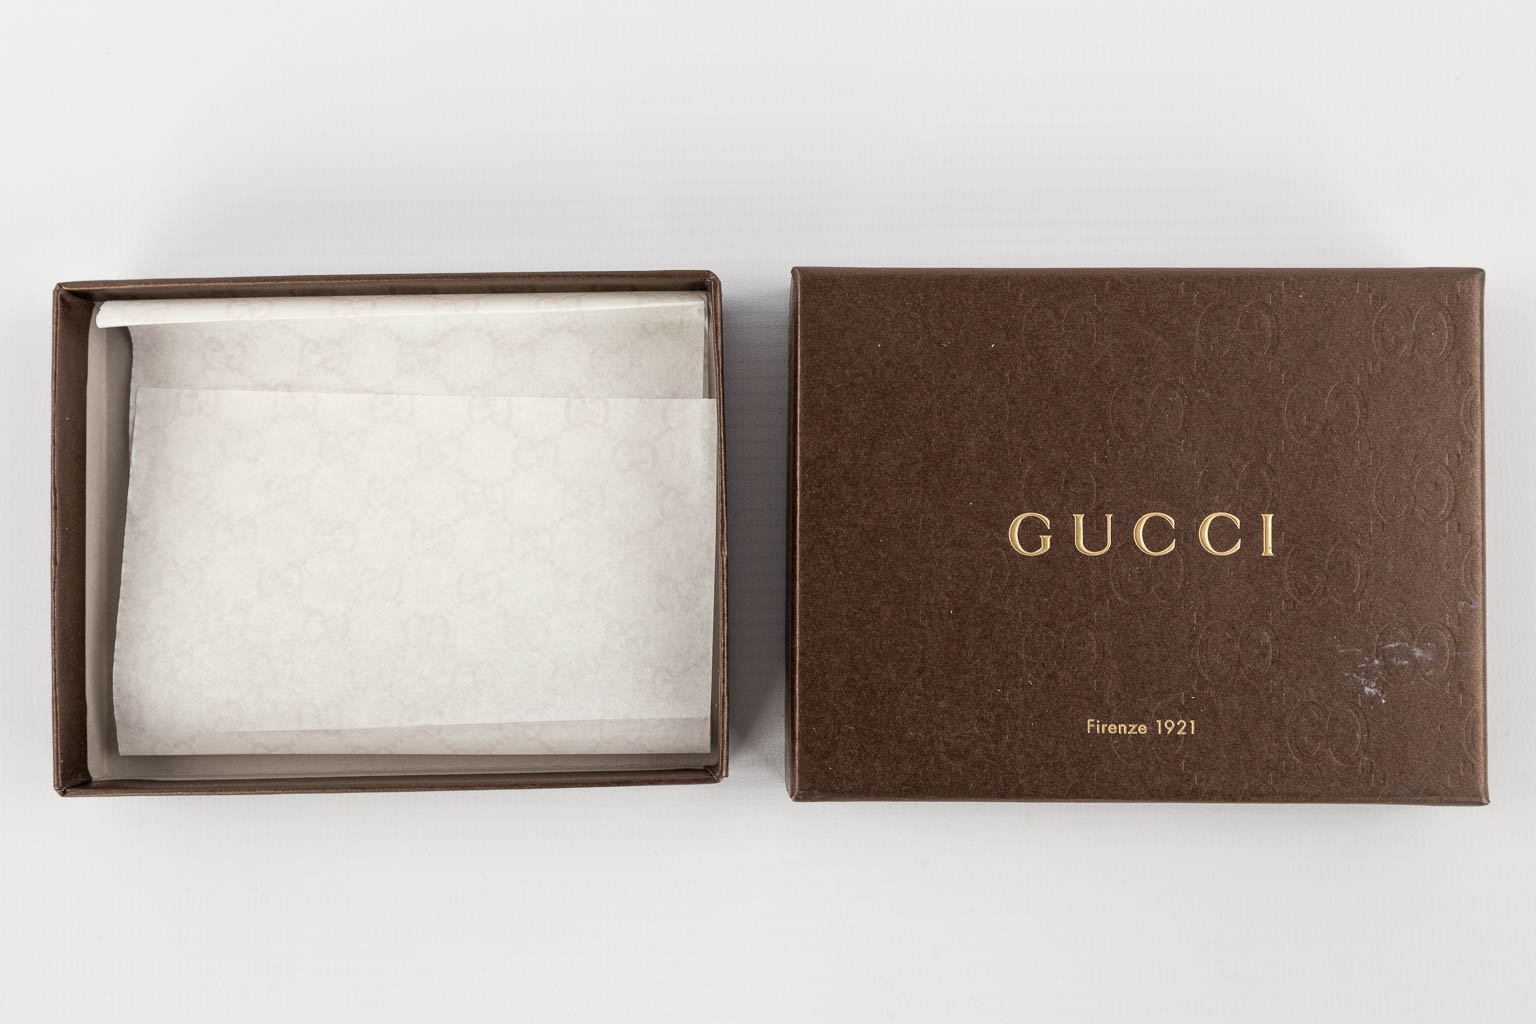 Delvaux & Gucci, a bank note and cardholder, Crocodile and calf leather. (W:10 x H:9,5 cm)